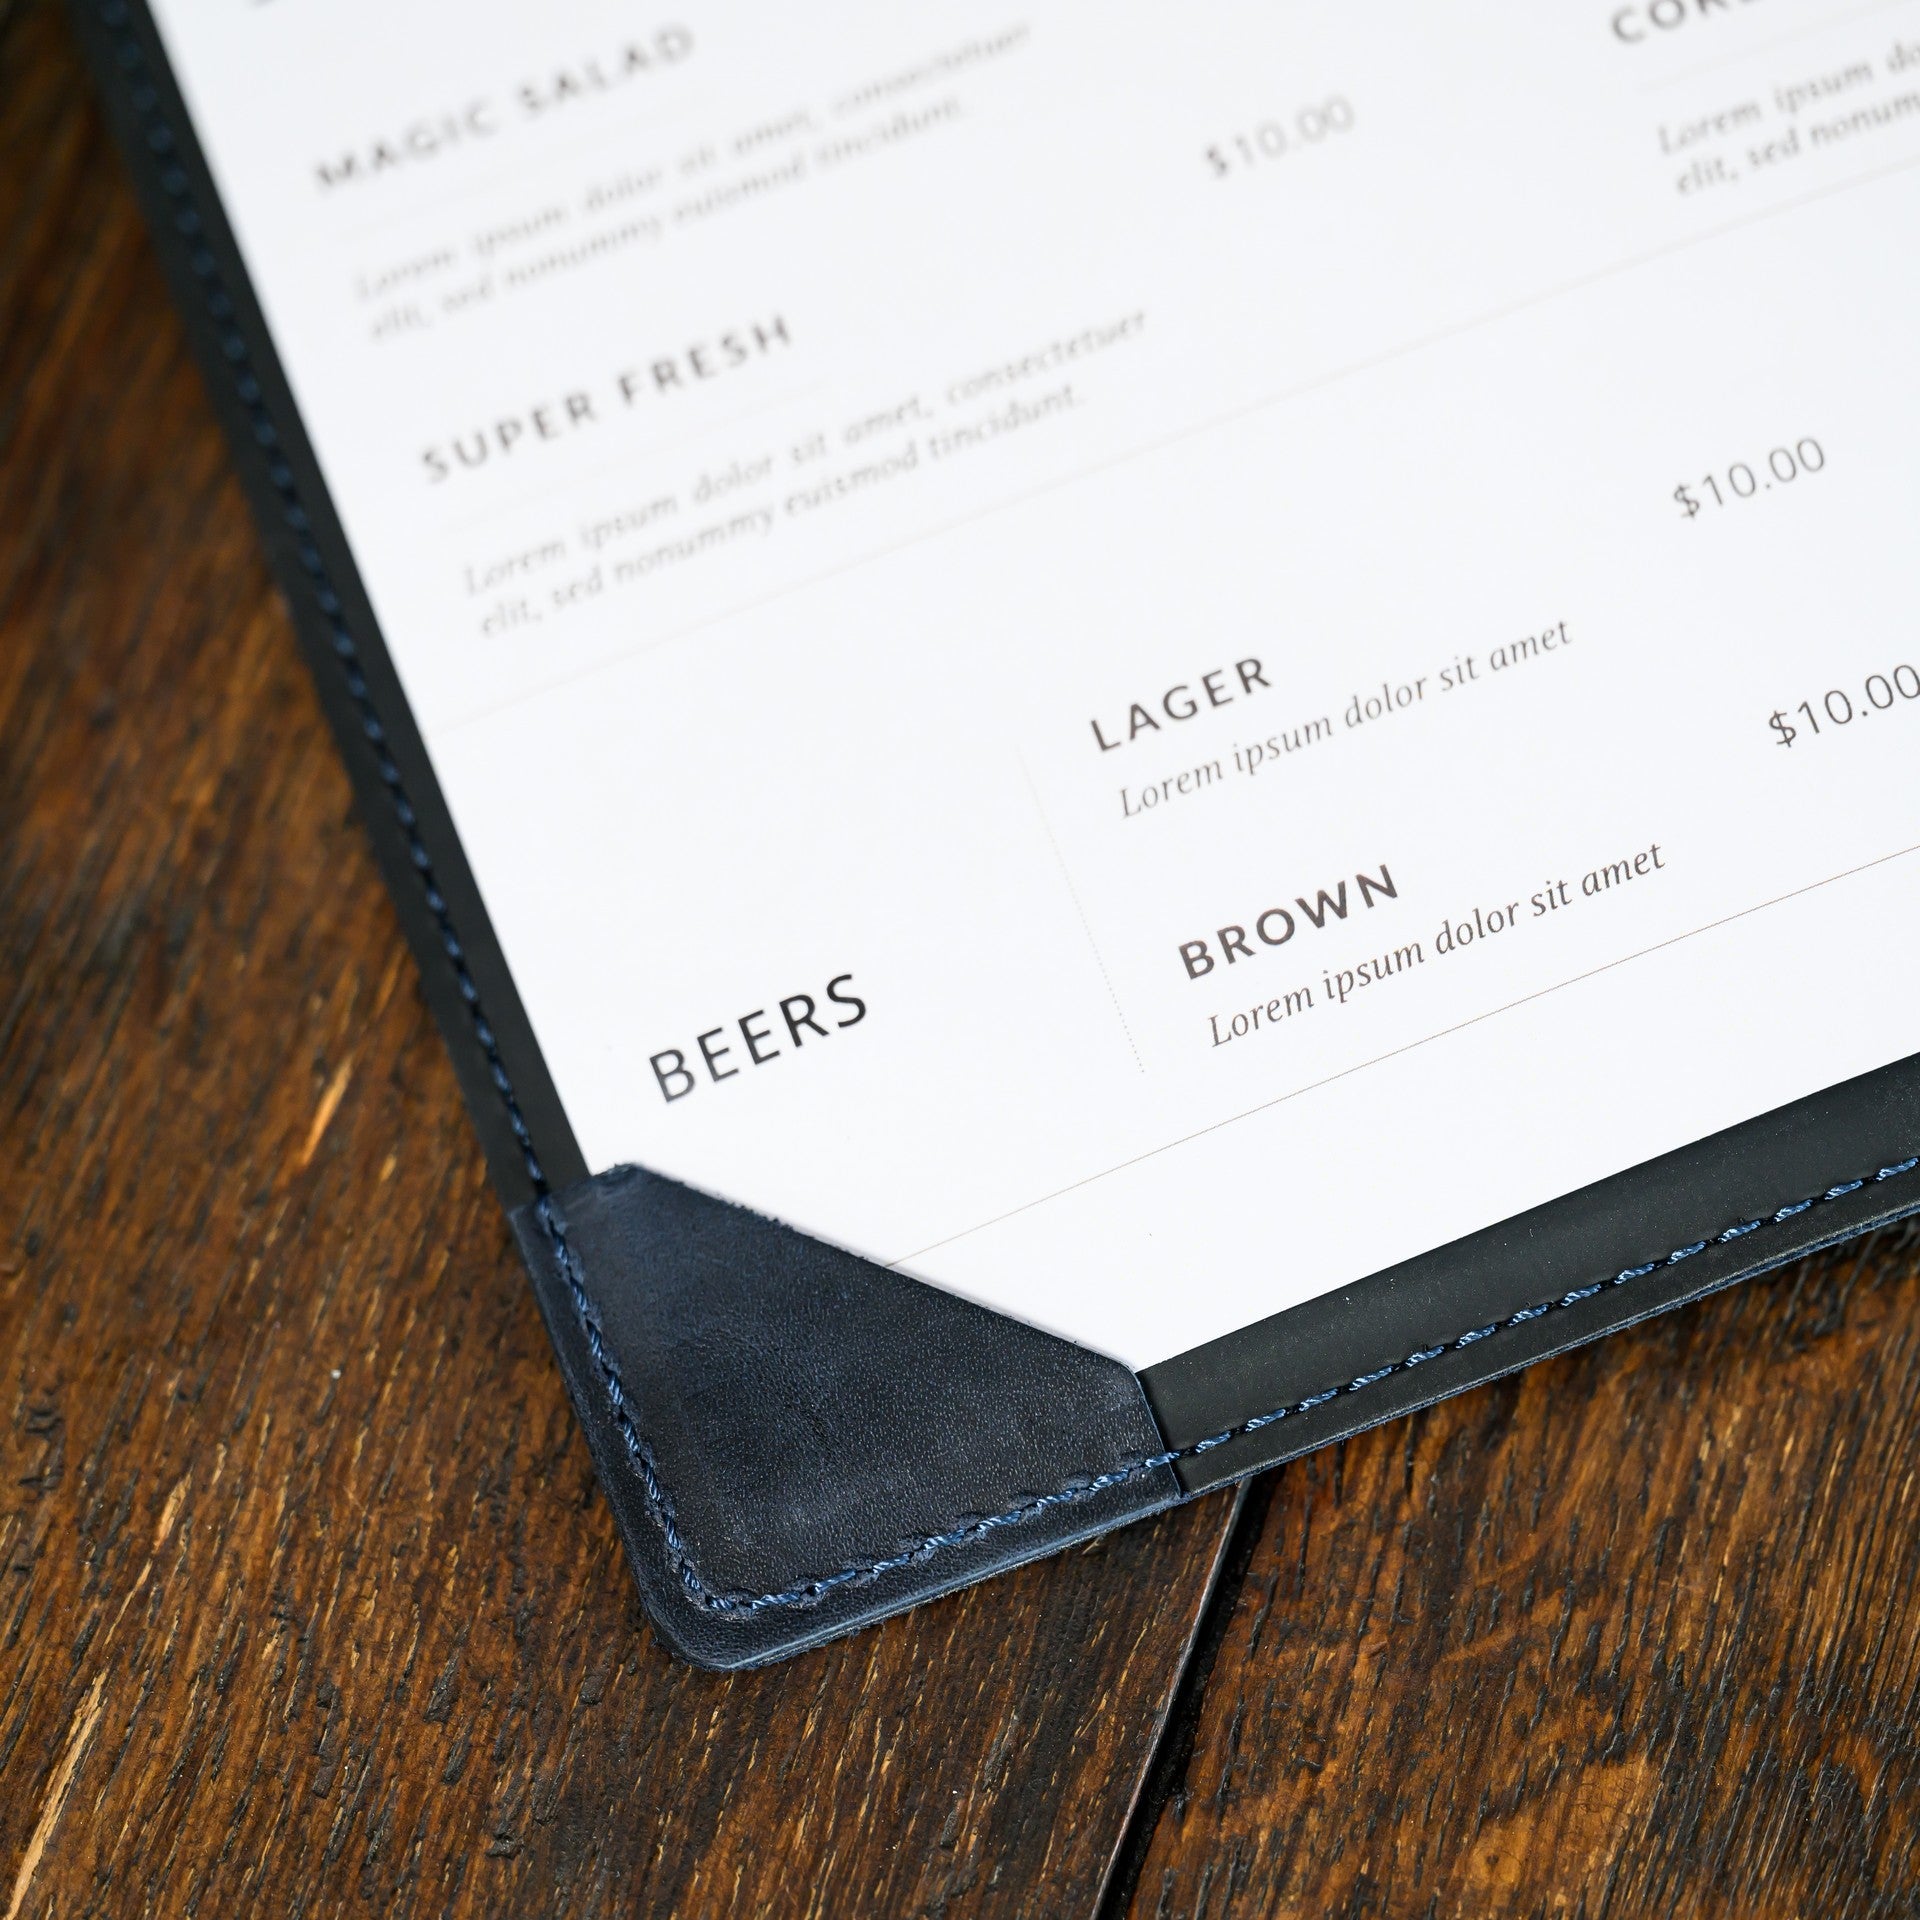 Our drink menu card folder adds a touch of class, perfect for presenting your beverages elegantly.